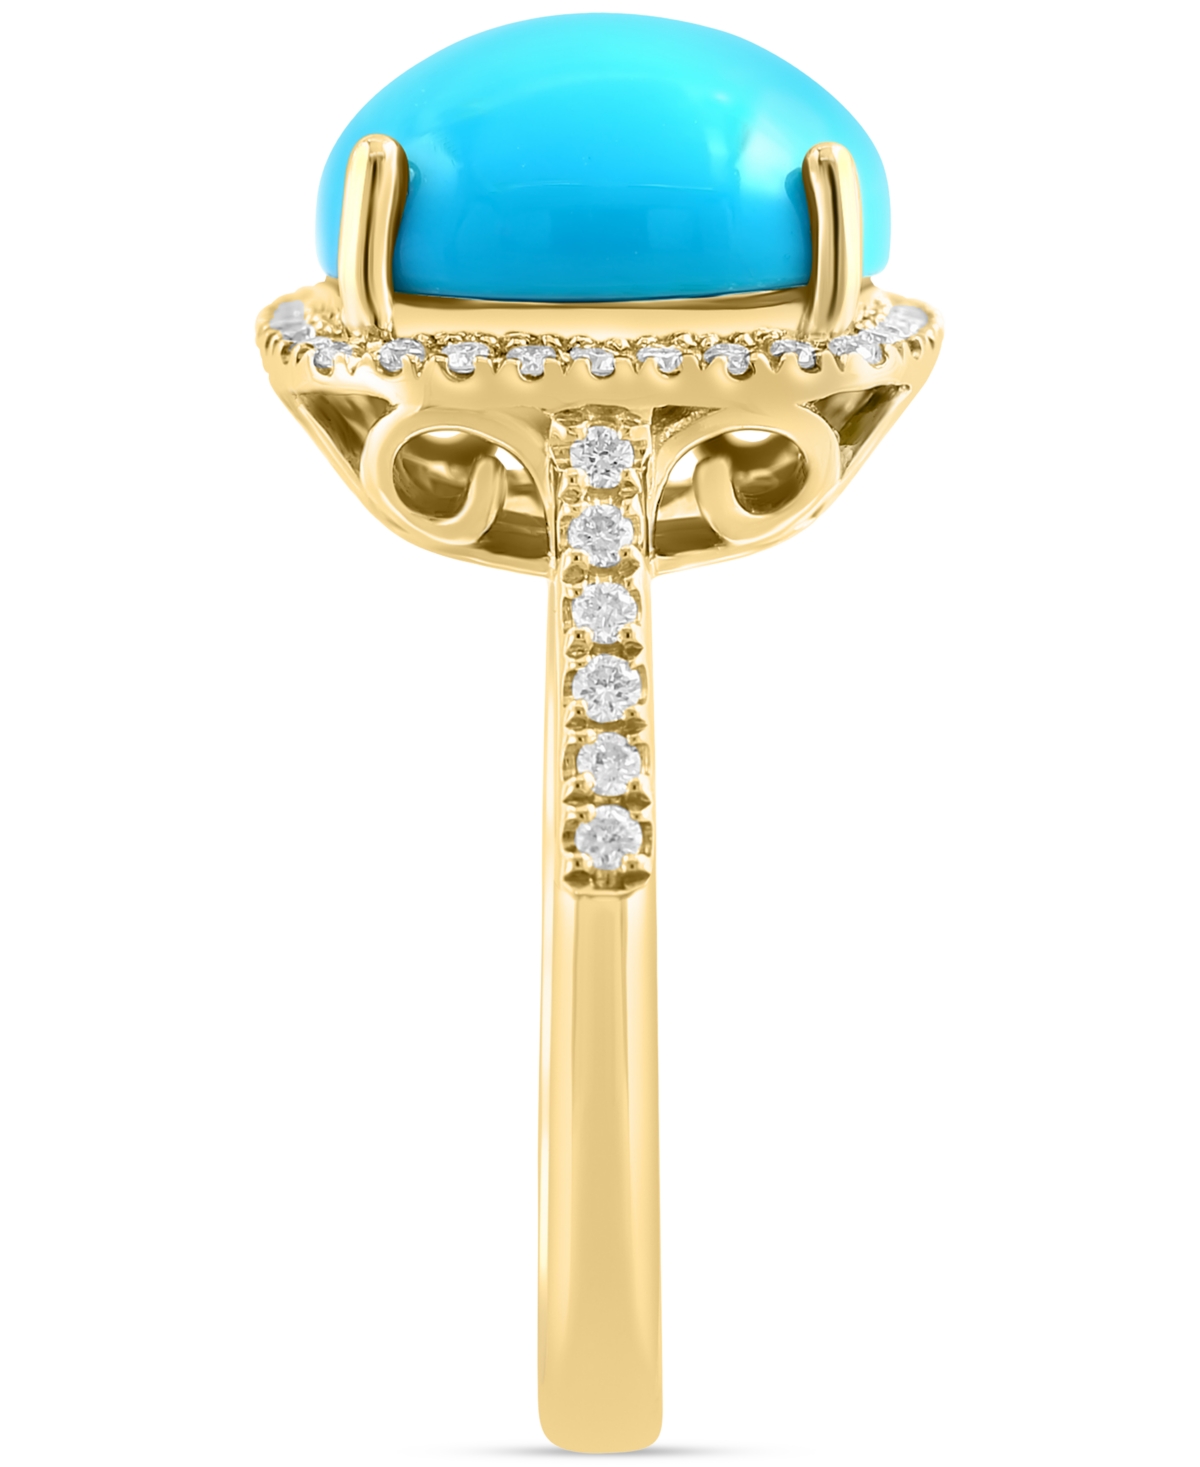 Shop Effy Collection Effy Turquoise & Diamond (1/4 Ct. T.w.) Halo Ring In 14k Gold In Yellow Gold